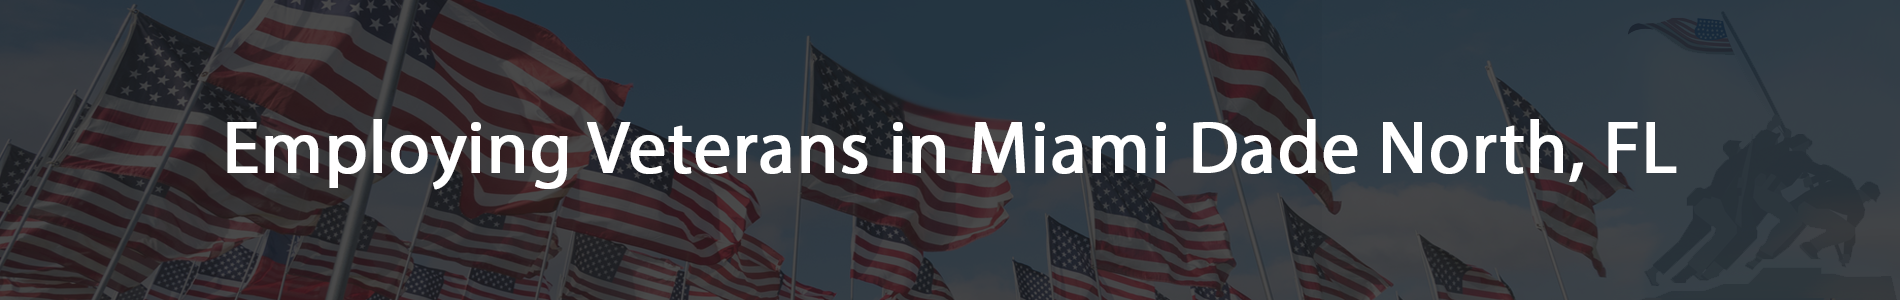 Hiring Our Heroes Miami Dade Page Banner